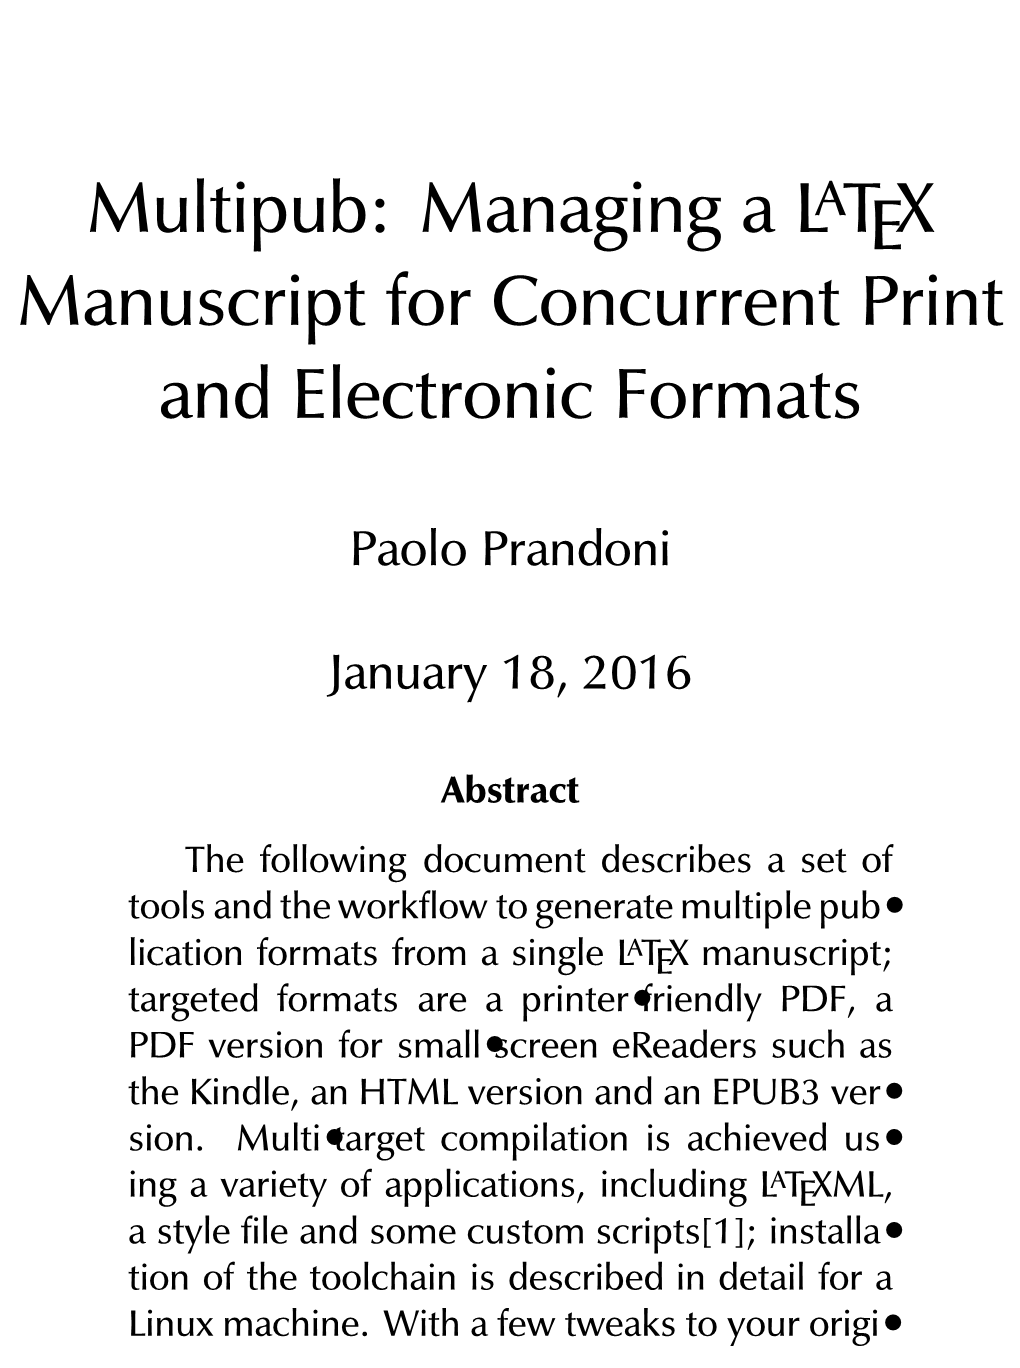 Multipub: Managing a LATEX Manuscript for Concurrent Print and Electronic Formats